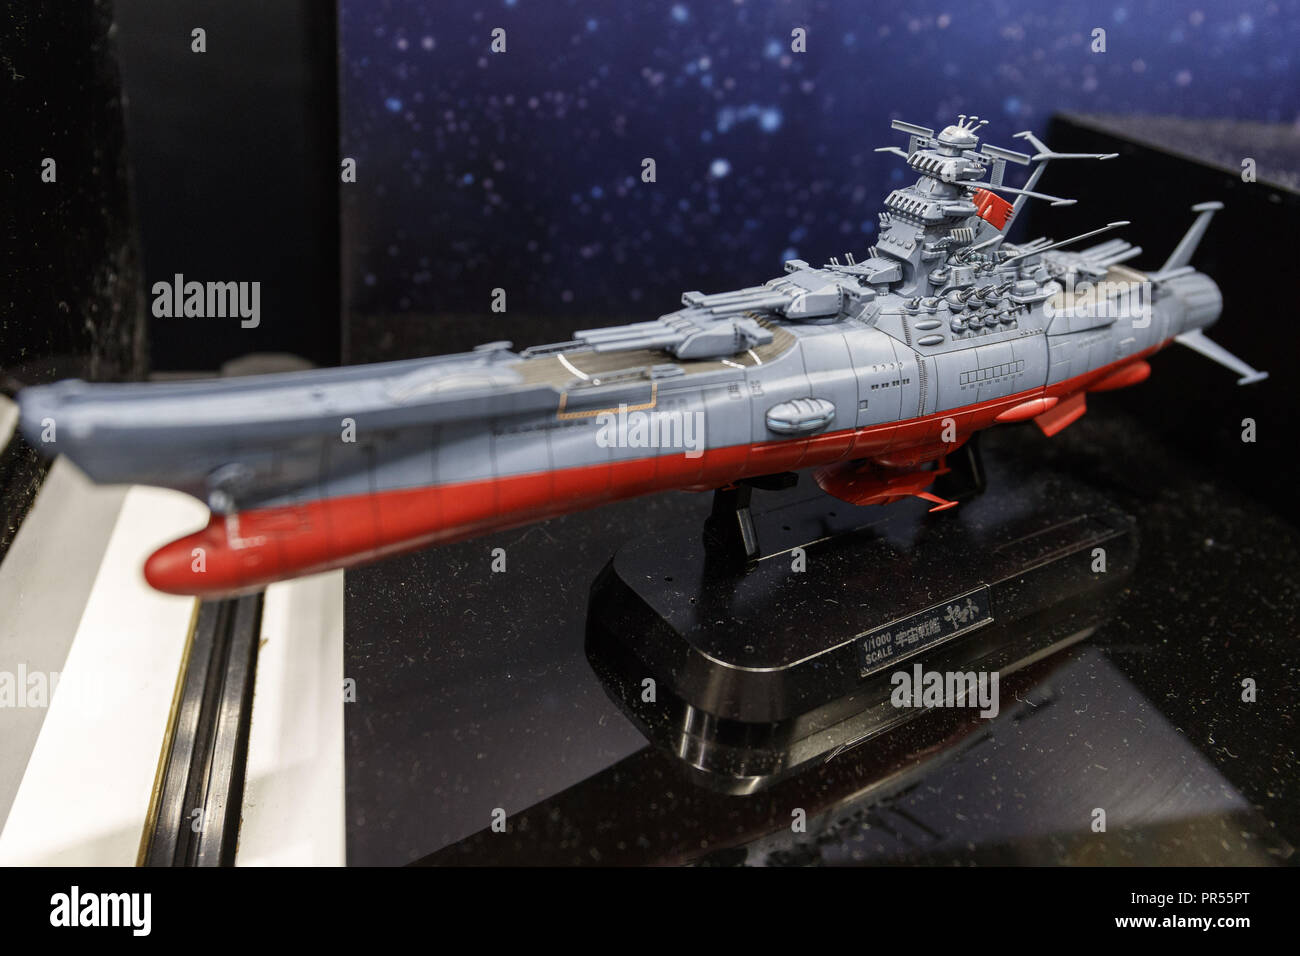 Tokyo, Japan. 29th Sep, 2018. A plastic model of the Space Battleship Yamato on display during the 58th All Japan Model and Hobby Show in Tokyo Big Sight. The annual exhibition introduces hobby goods such as plastic models, action figures, drones and airsoft guns from September 28 to 30. Credit: Rodrigo Reyes Marin/ZUMA Wire/Alamy Live News Stock Photo